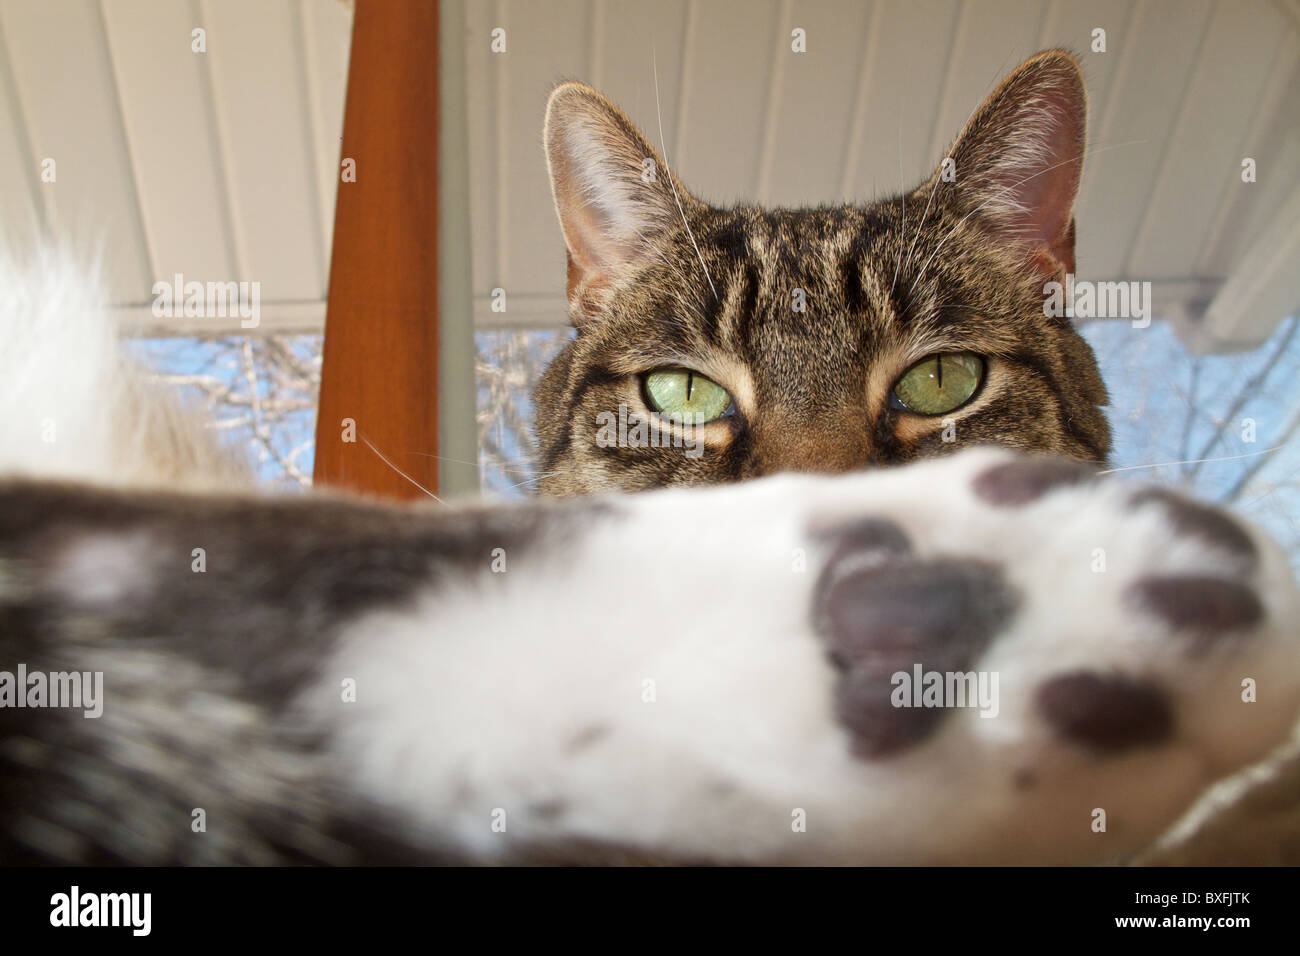 Brown tabby cat. Peering over hind paw. Stock Photo